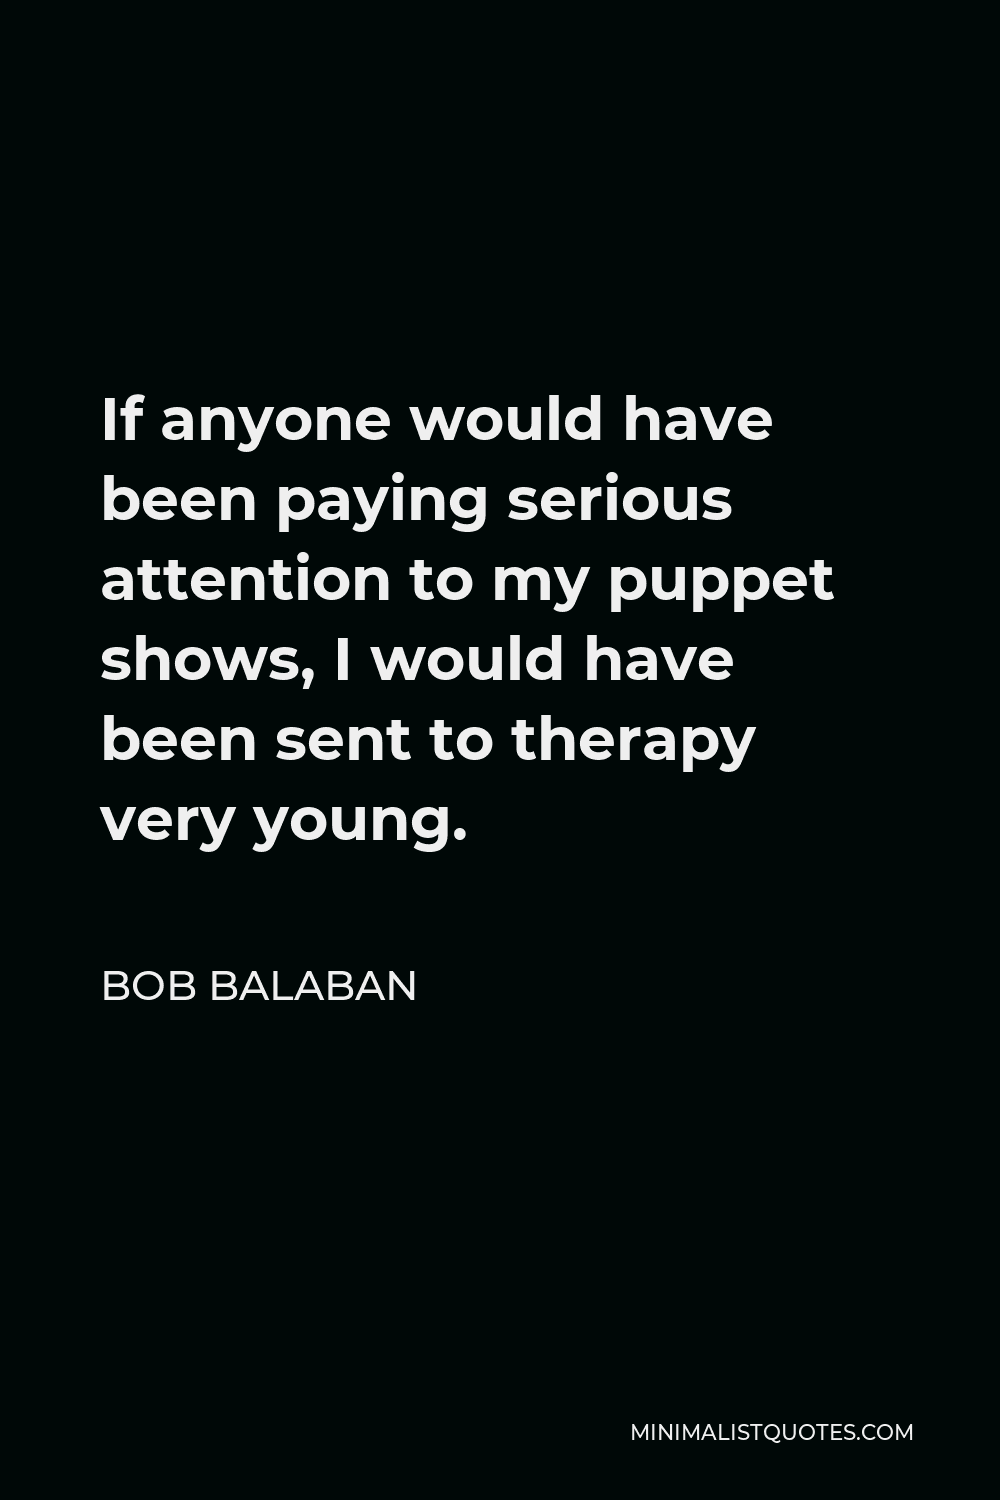 Bob Balaban Quote - If anyone would have been paying serious attention to my puppet shows, I would have been sent to therapy very young.